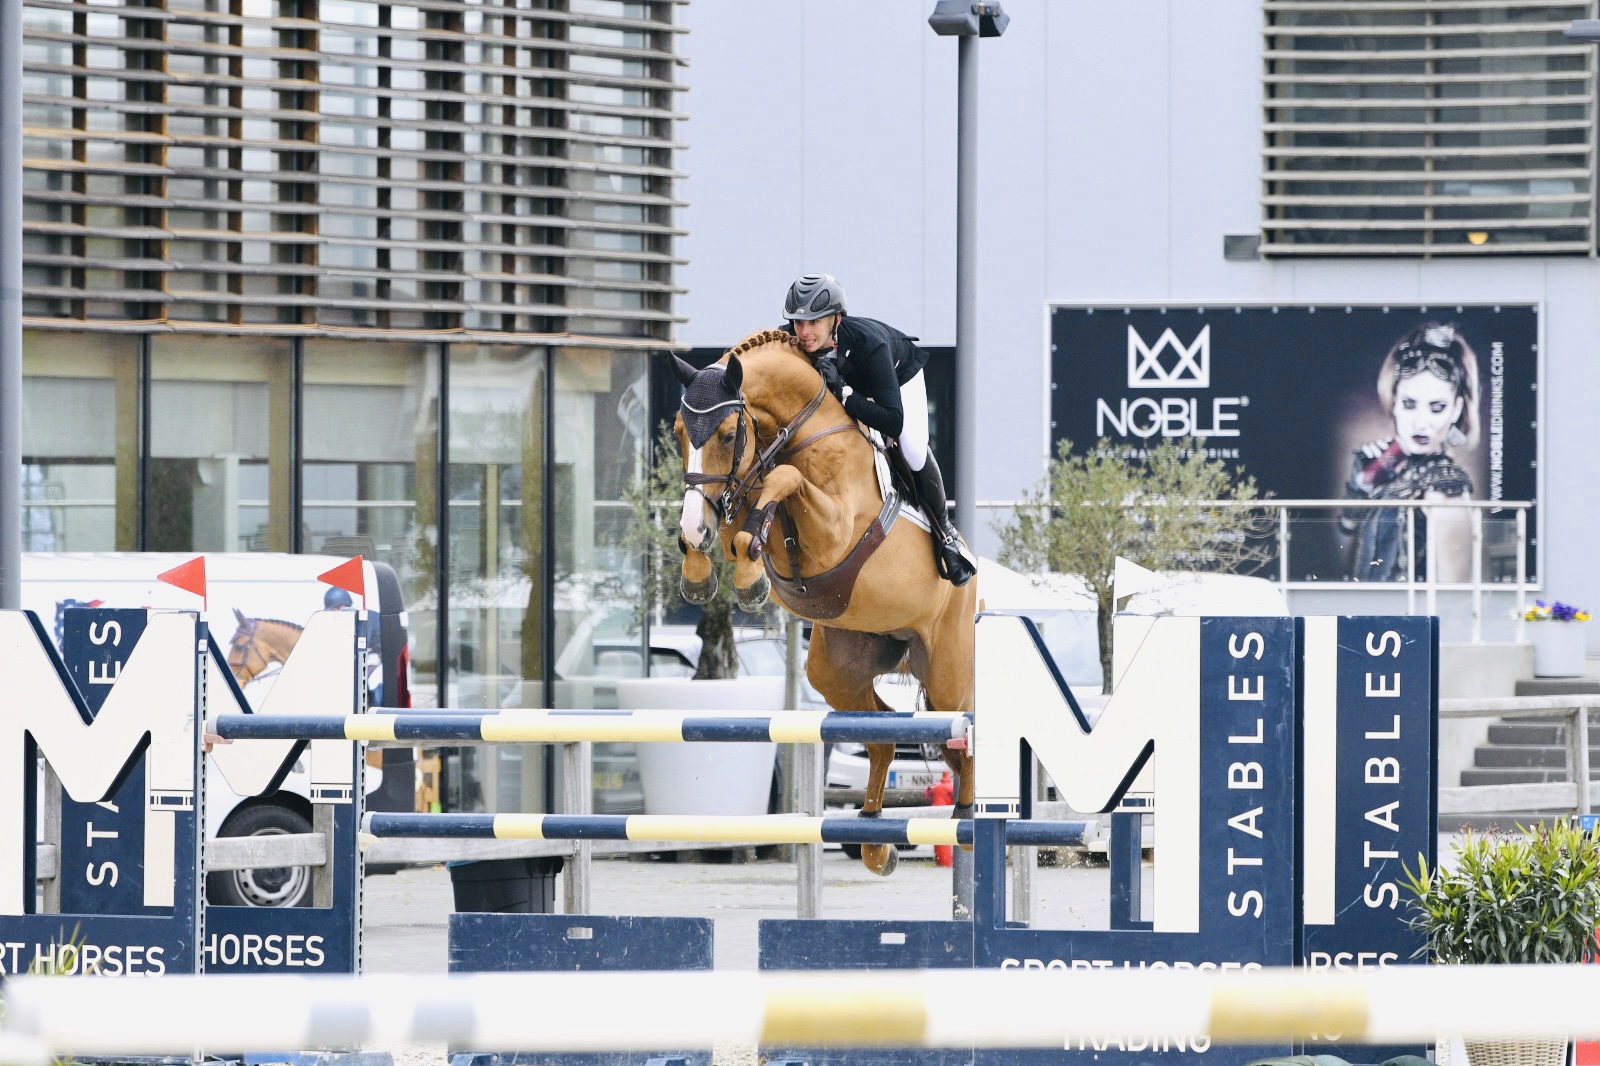 3/3 clear rounds for Babou du Rouet and Niels Fockaert in the CSI2* 1.40m at Sentower Park!